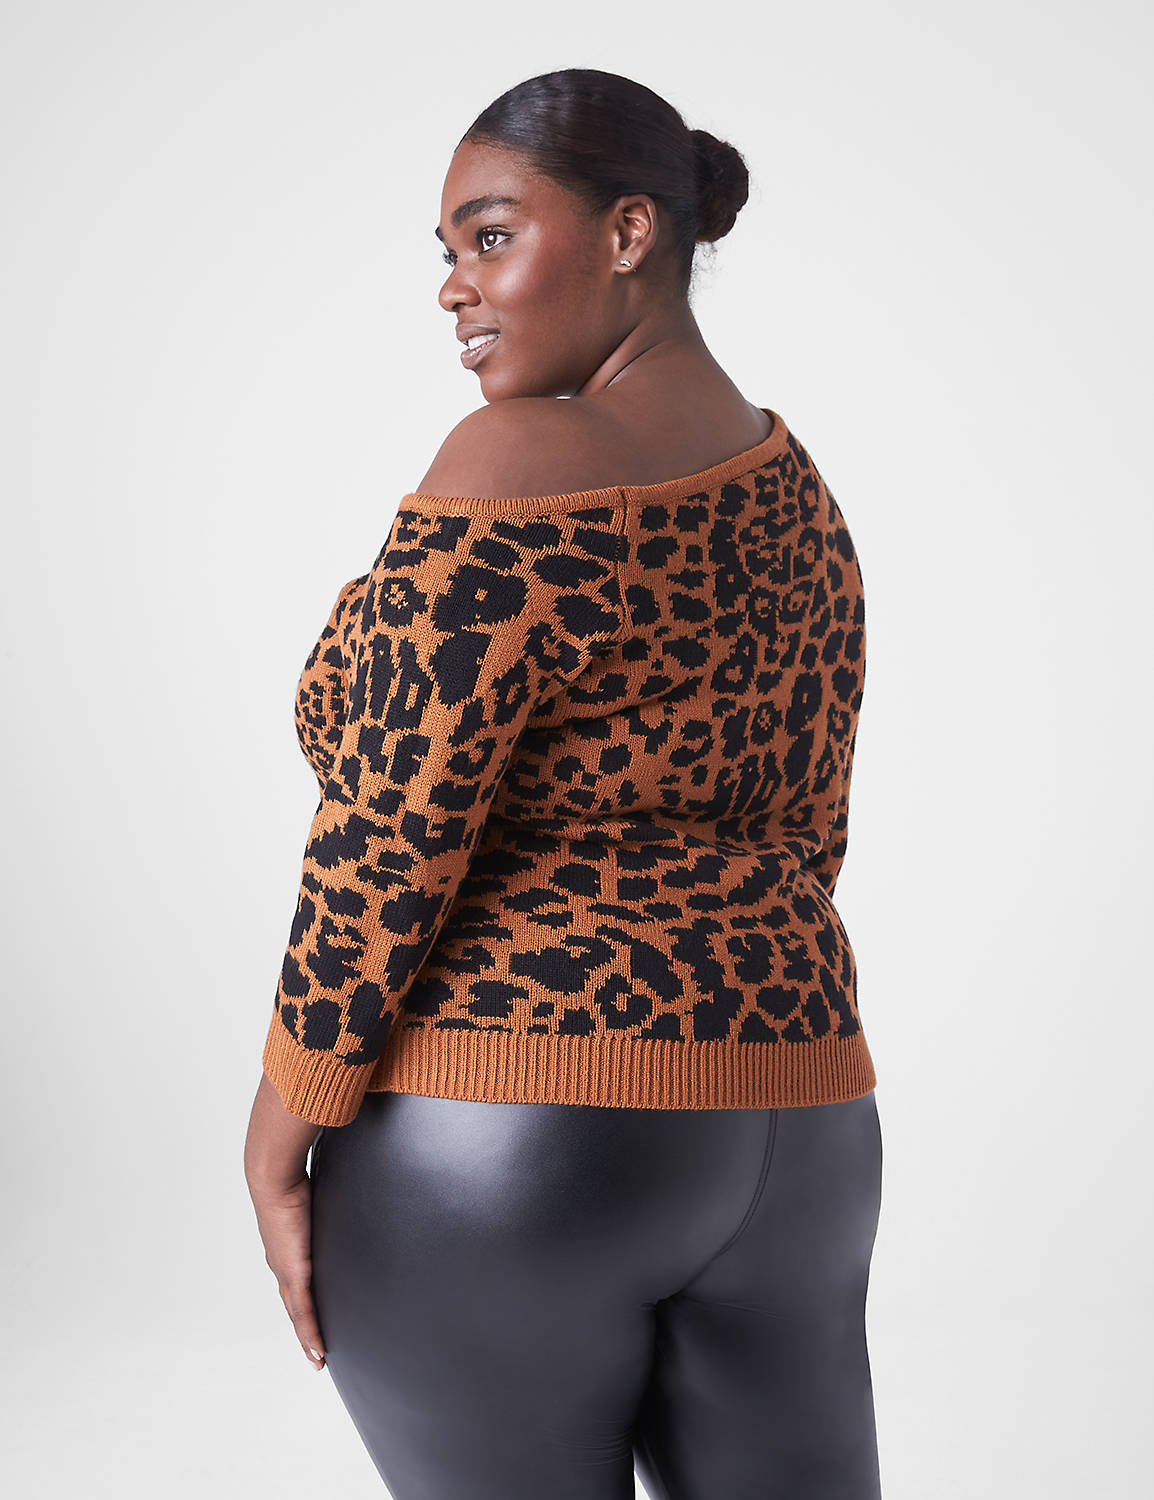 Fitted One-Shoulder Jacquard Sweater | LaneBryant